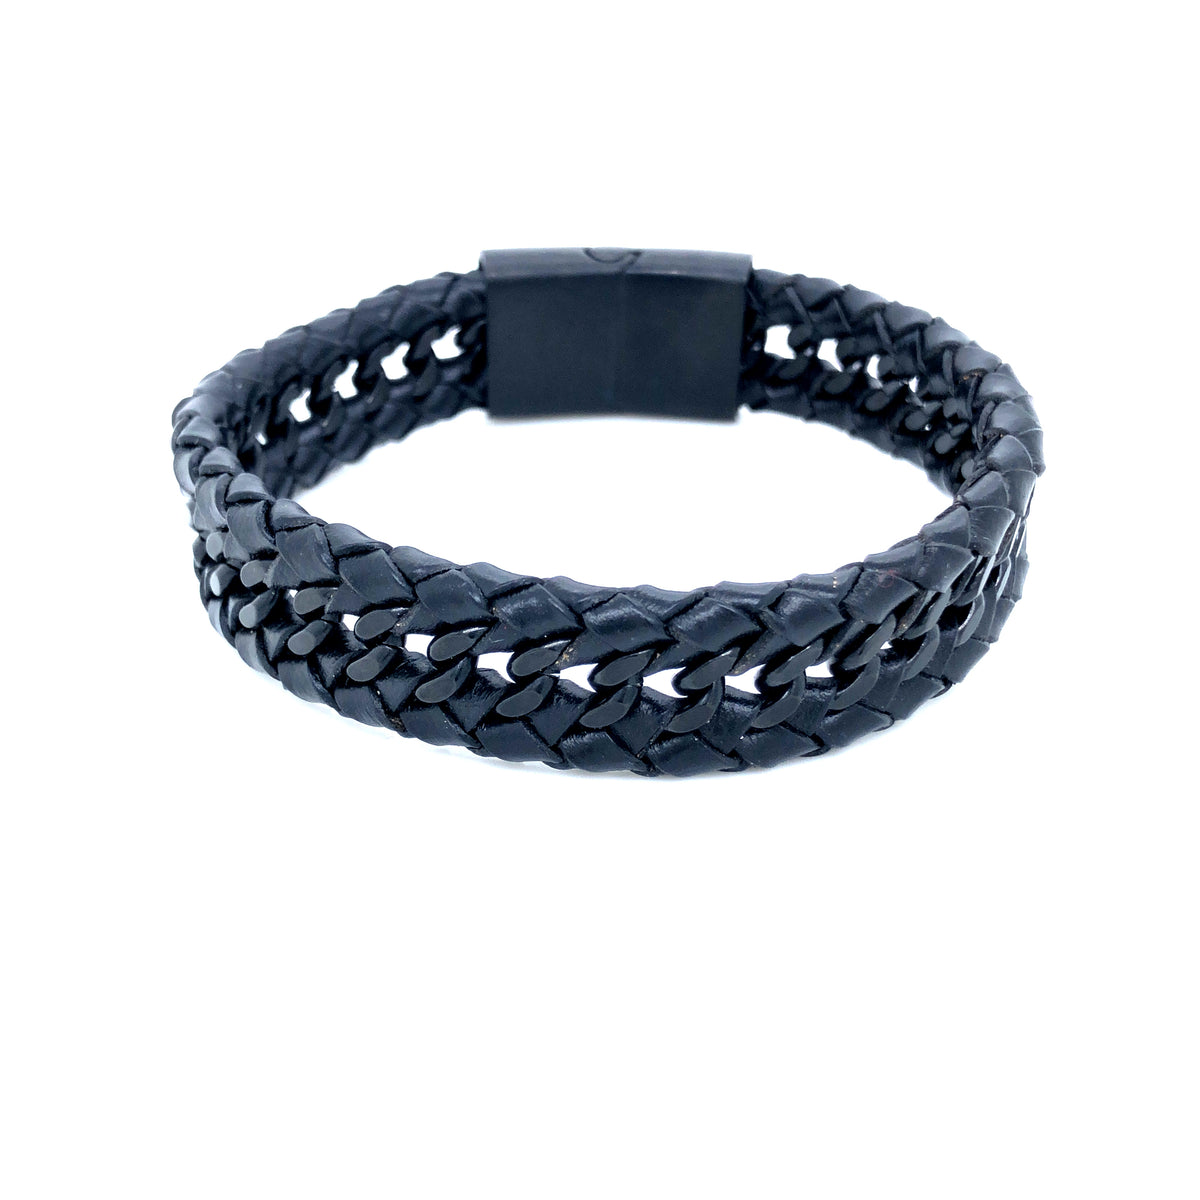 Leather Braided With Black Ion Plated Stainless Steel Chain Bracelet